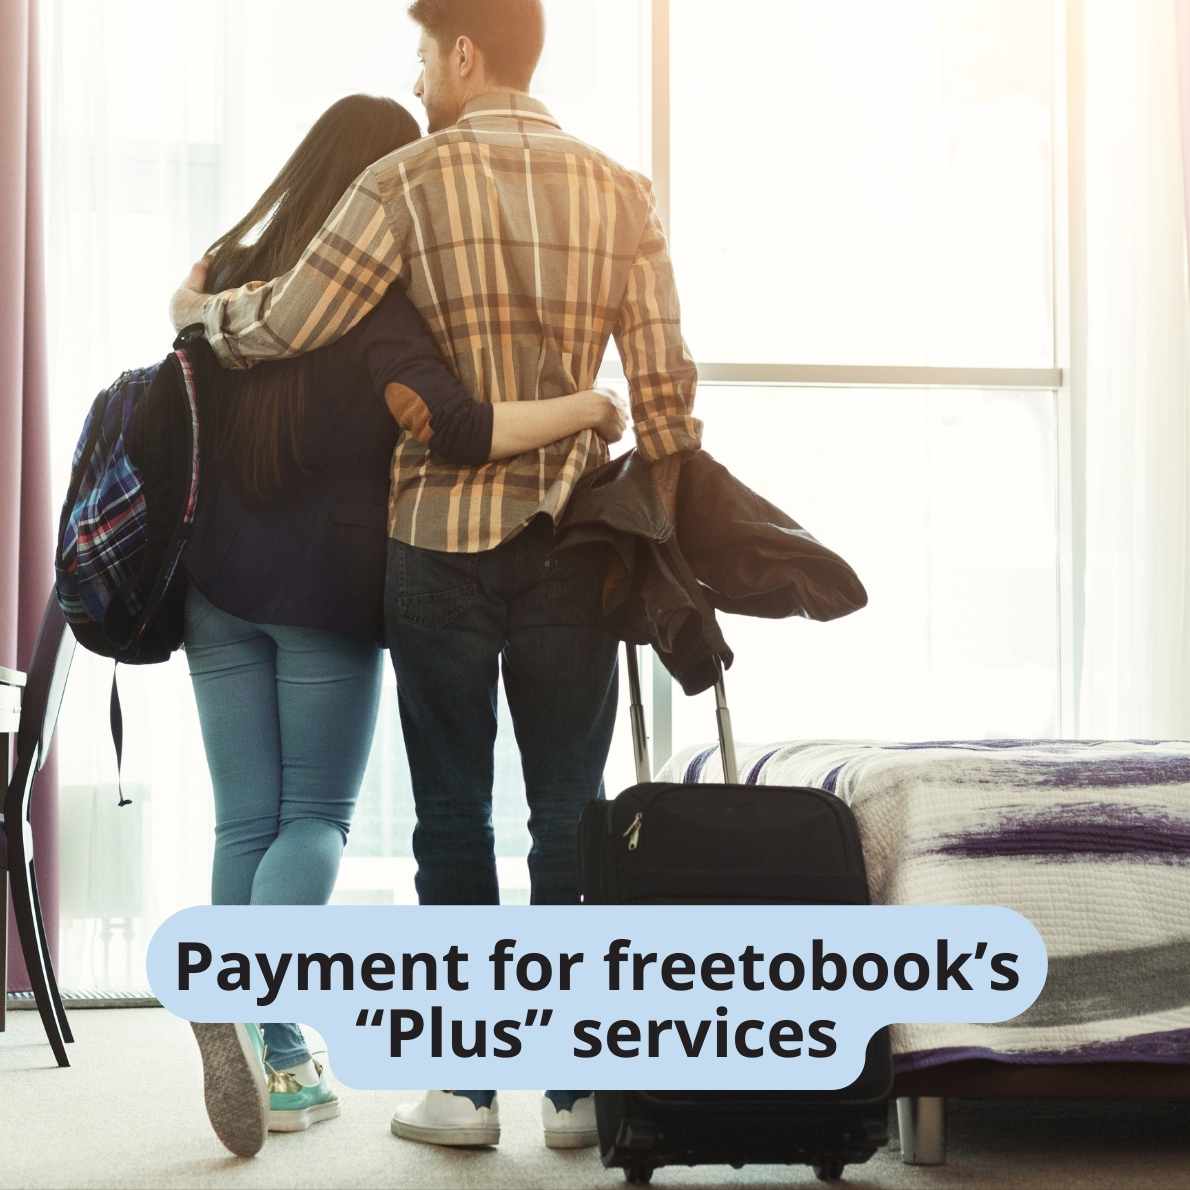 Payment for freetobook plus services